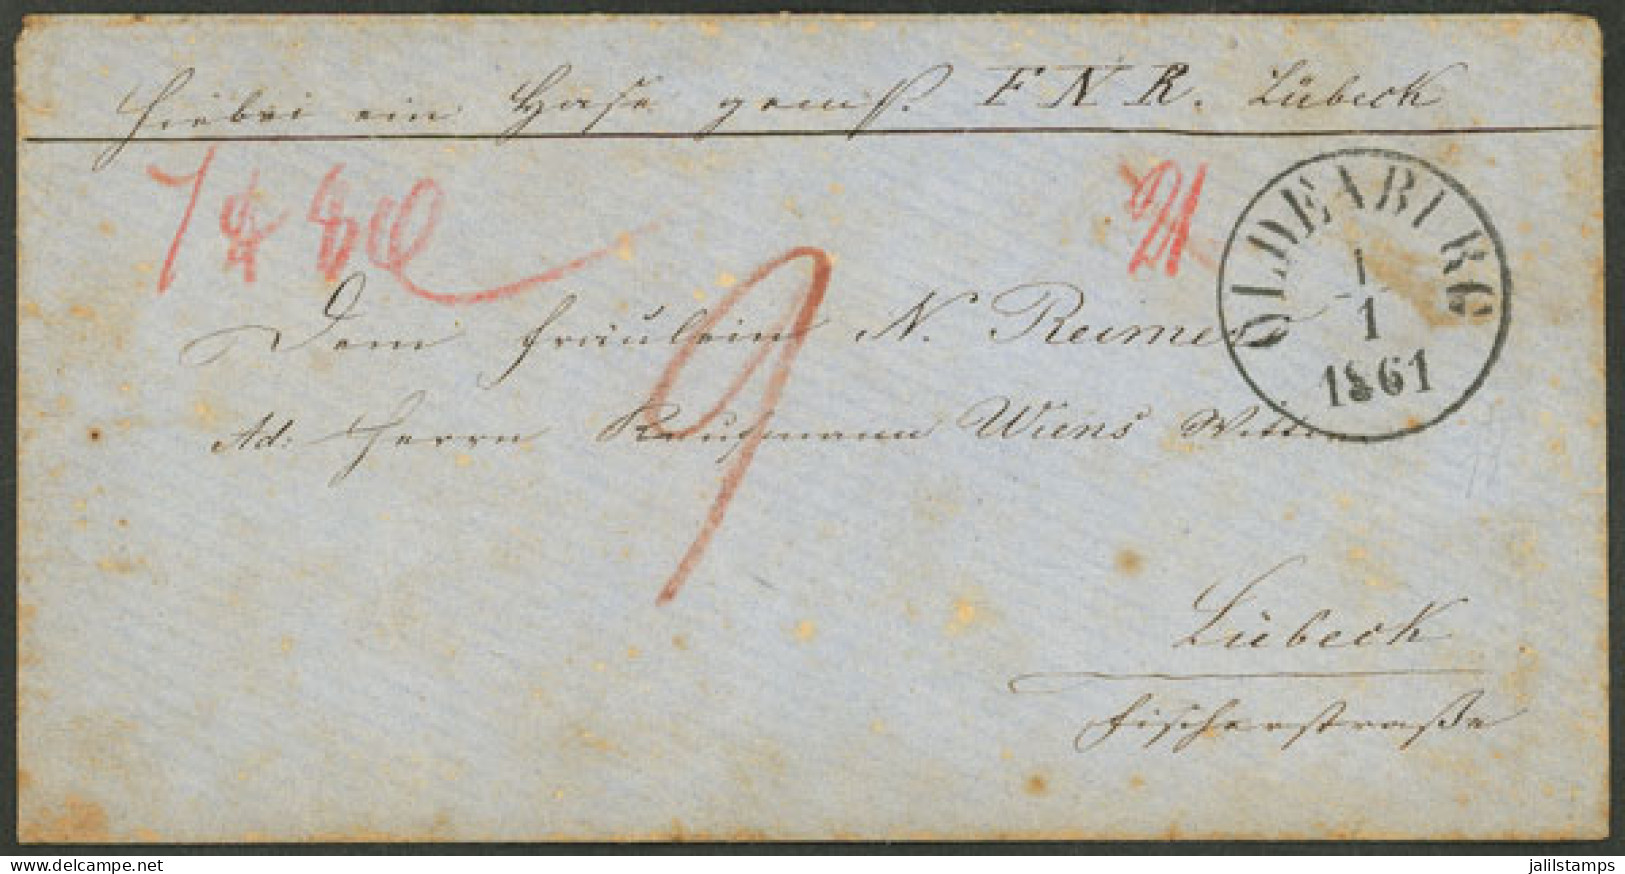 GERMANY: 1/JA/1861 Oldenburg - Lübeck, Cover Without Postage, With Nice Cancels And Interesting Hand-written Marks! - Lettres & Documents